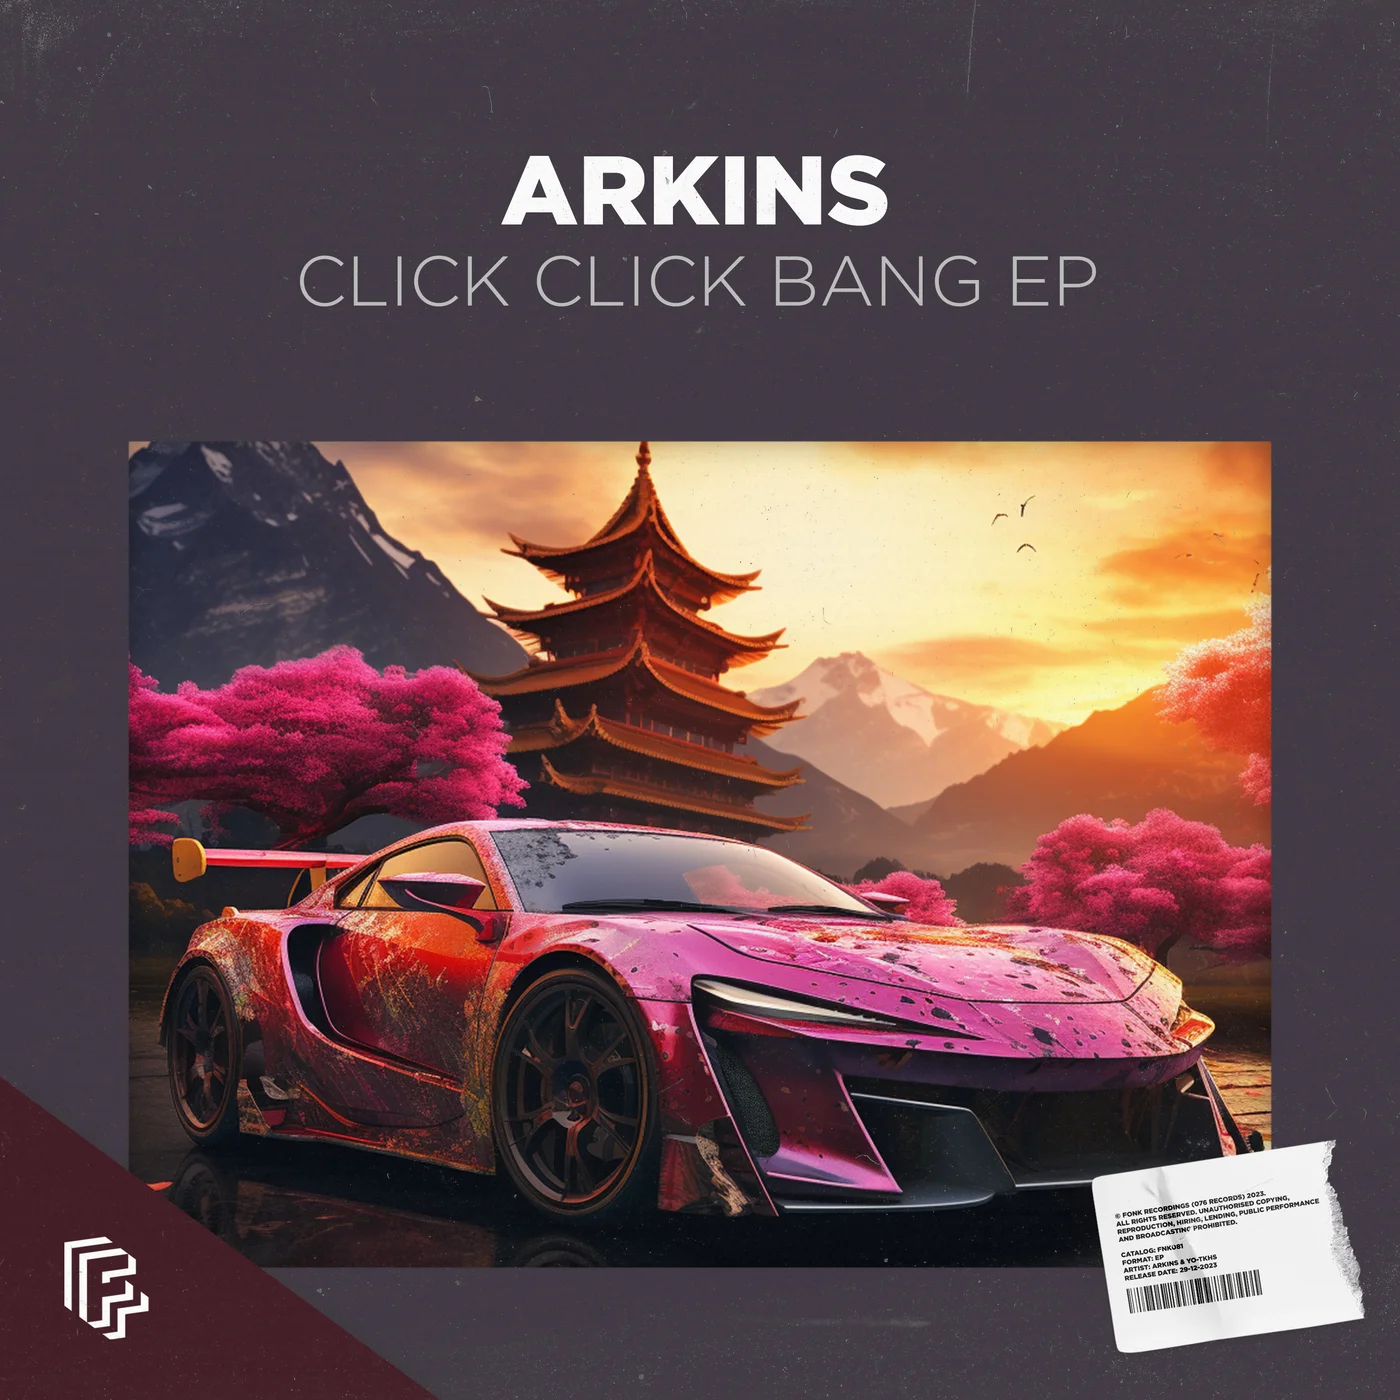 Arkins - Come With Me (Dannic Edit)